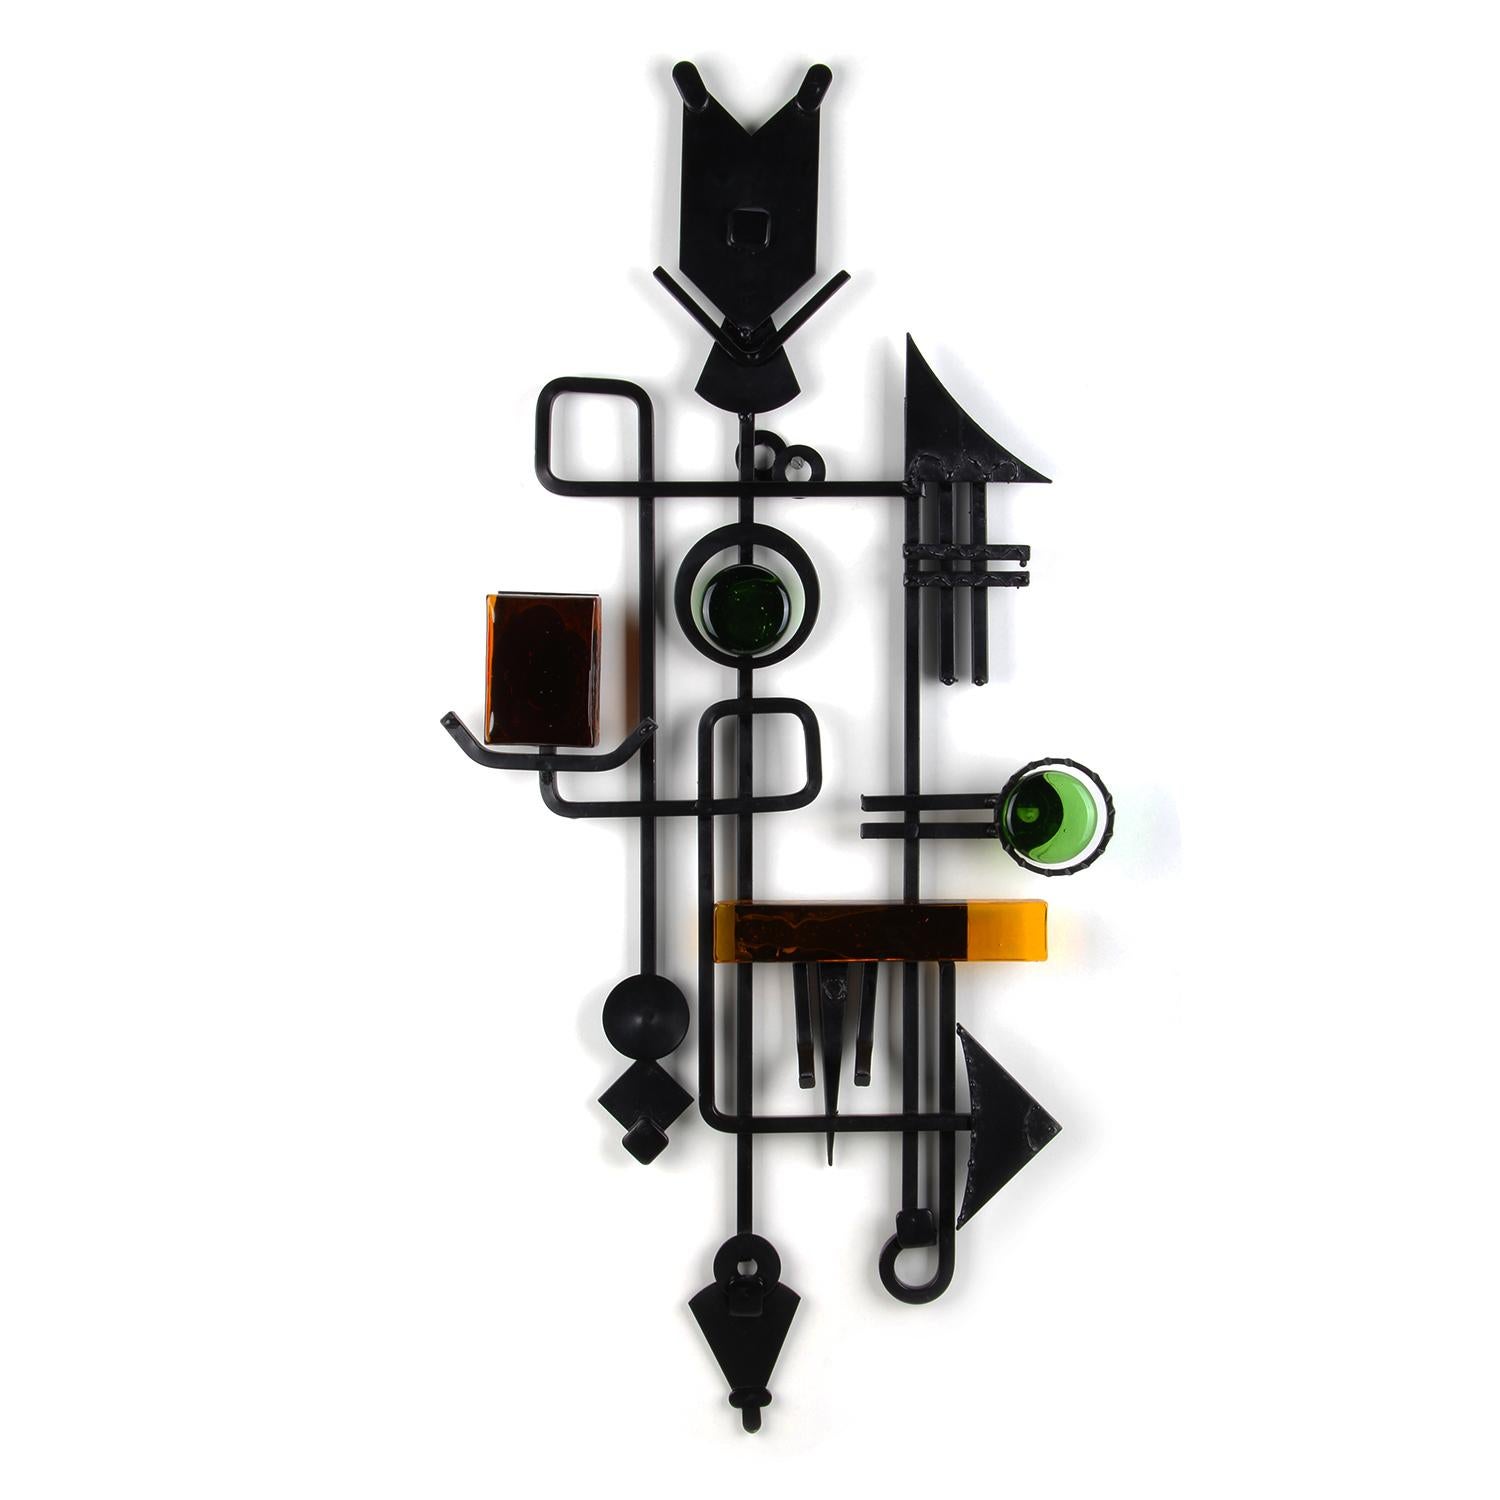 Wall relief by Dantoft Kunstartikler, Denmark, circa 1960s. Unique artisan work in welded metal with glass pieces in green and orange in excellent vintage condition.

Wondrous collage of imagination and geometric shapes - materialized in black,